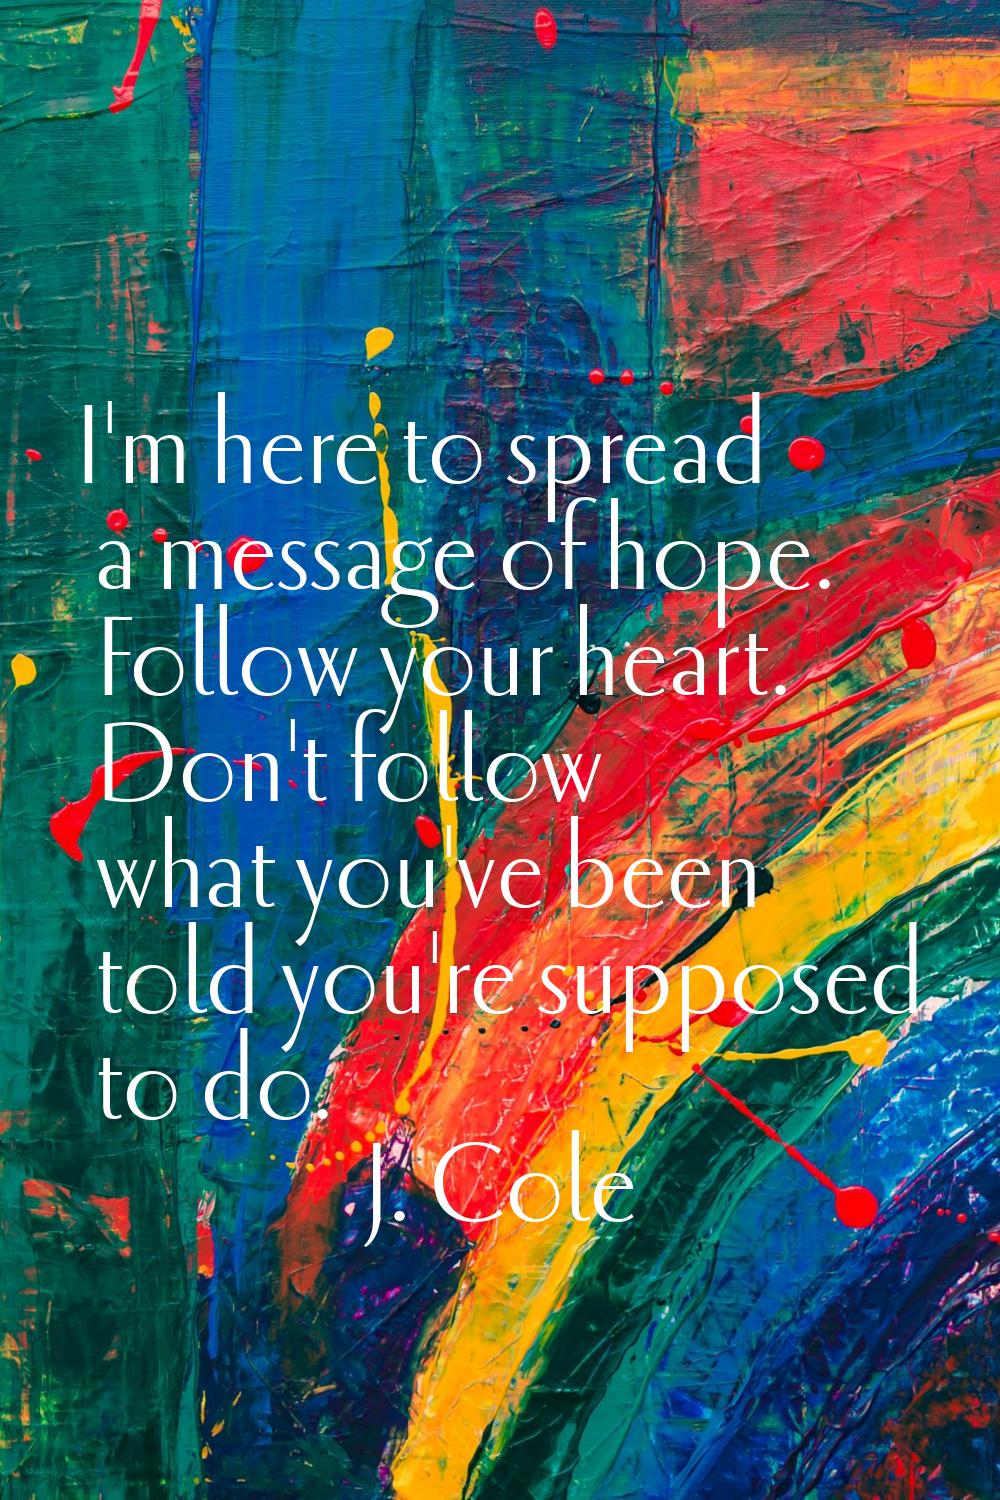 I'm here to spread a message of hope. Follow your heart. Don't follow what you've been told you're 